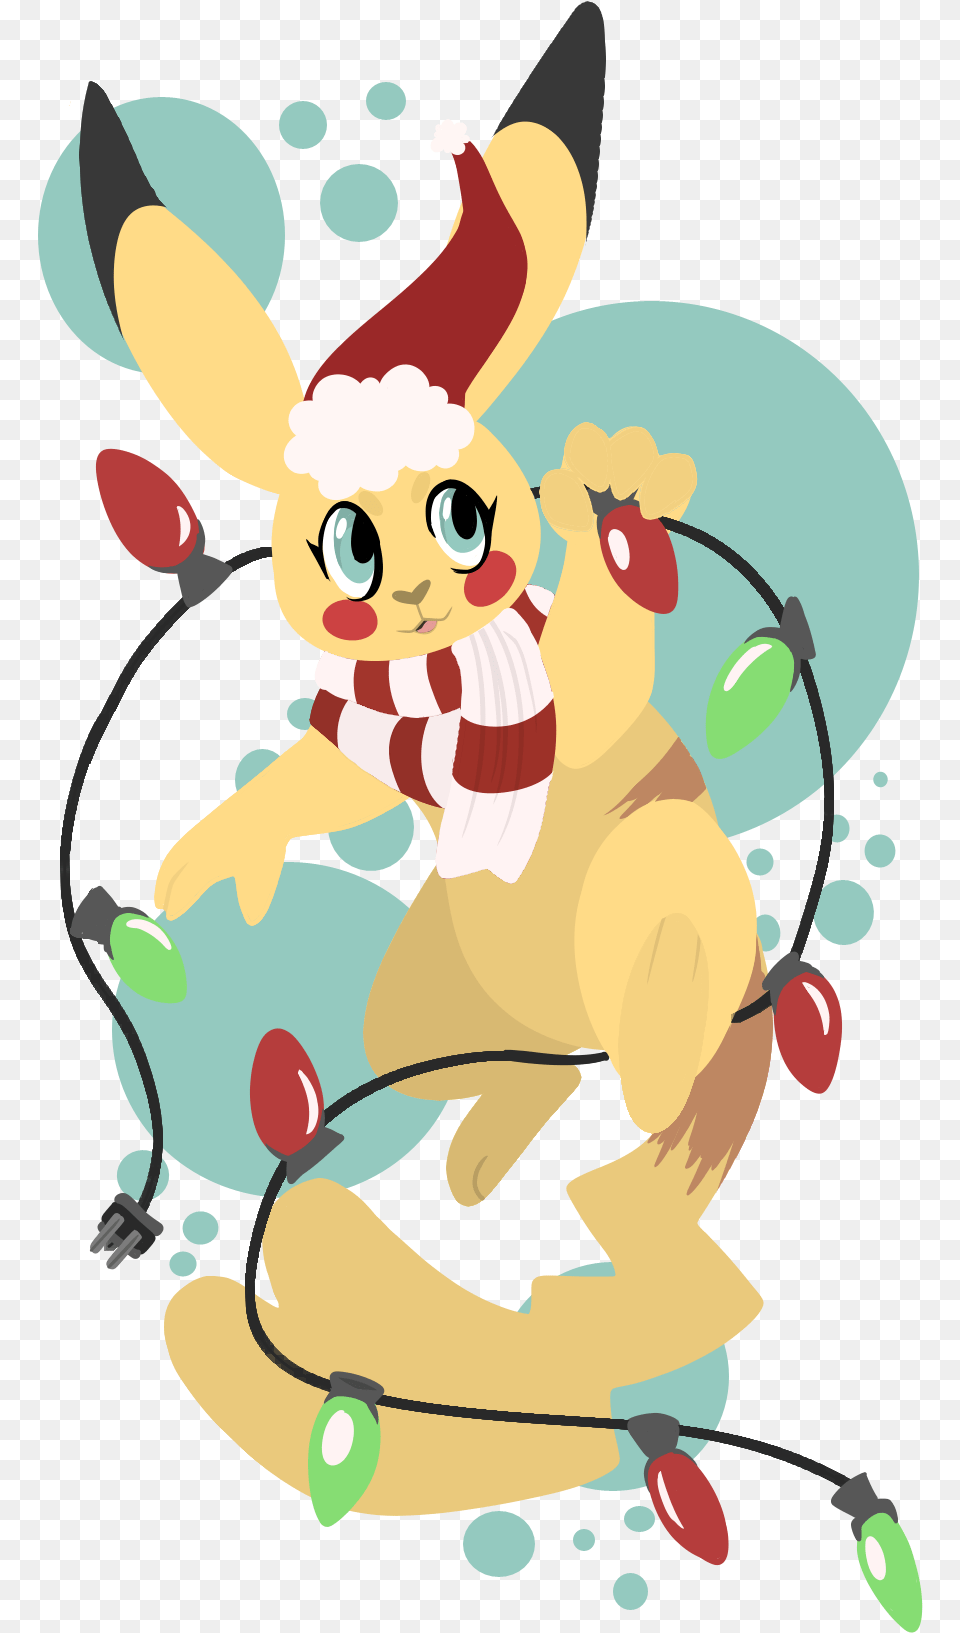 Oc I Drew A Festive Pikachu And Thought I39d Share, Ice Cream, Cream, Dessert, Food Png Image